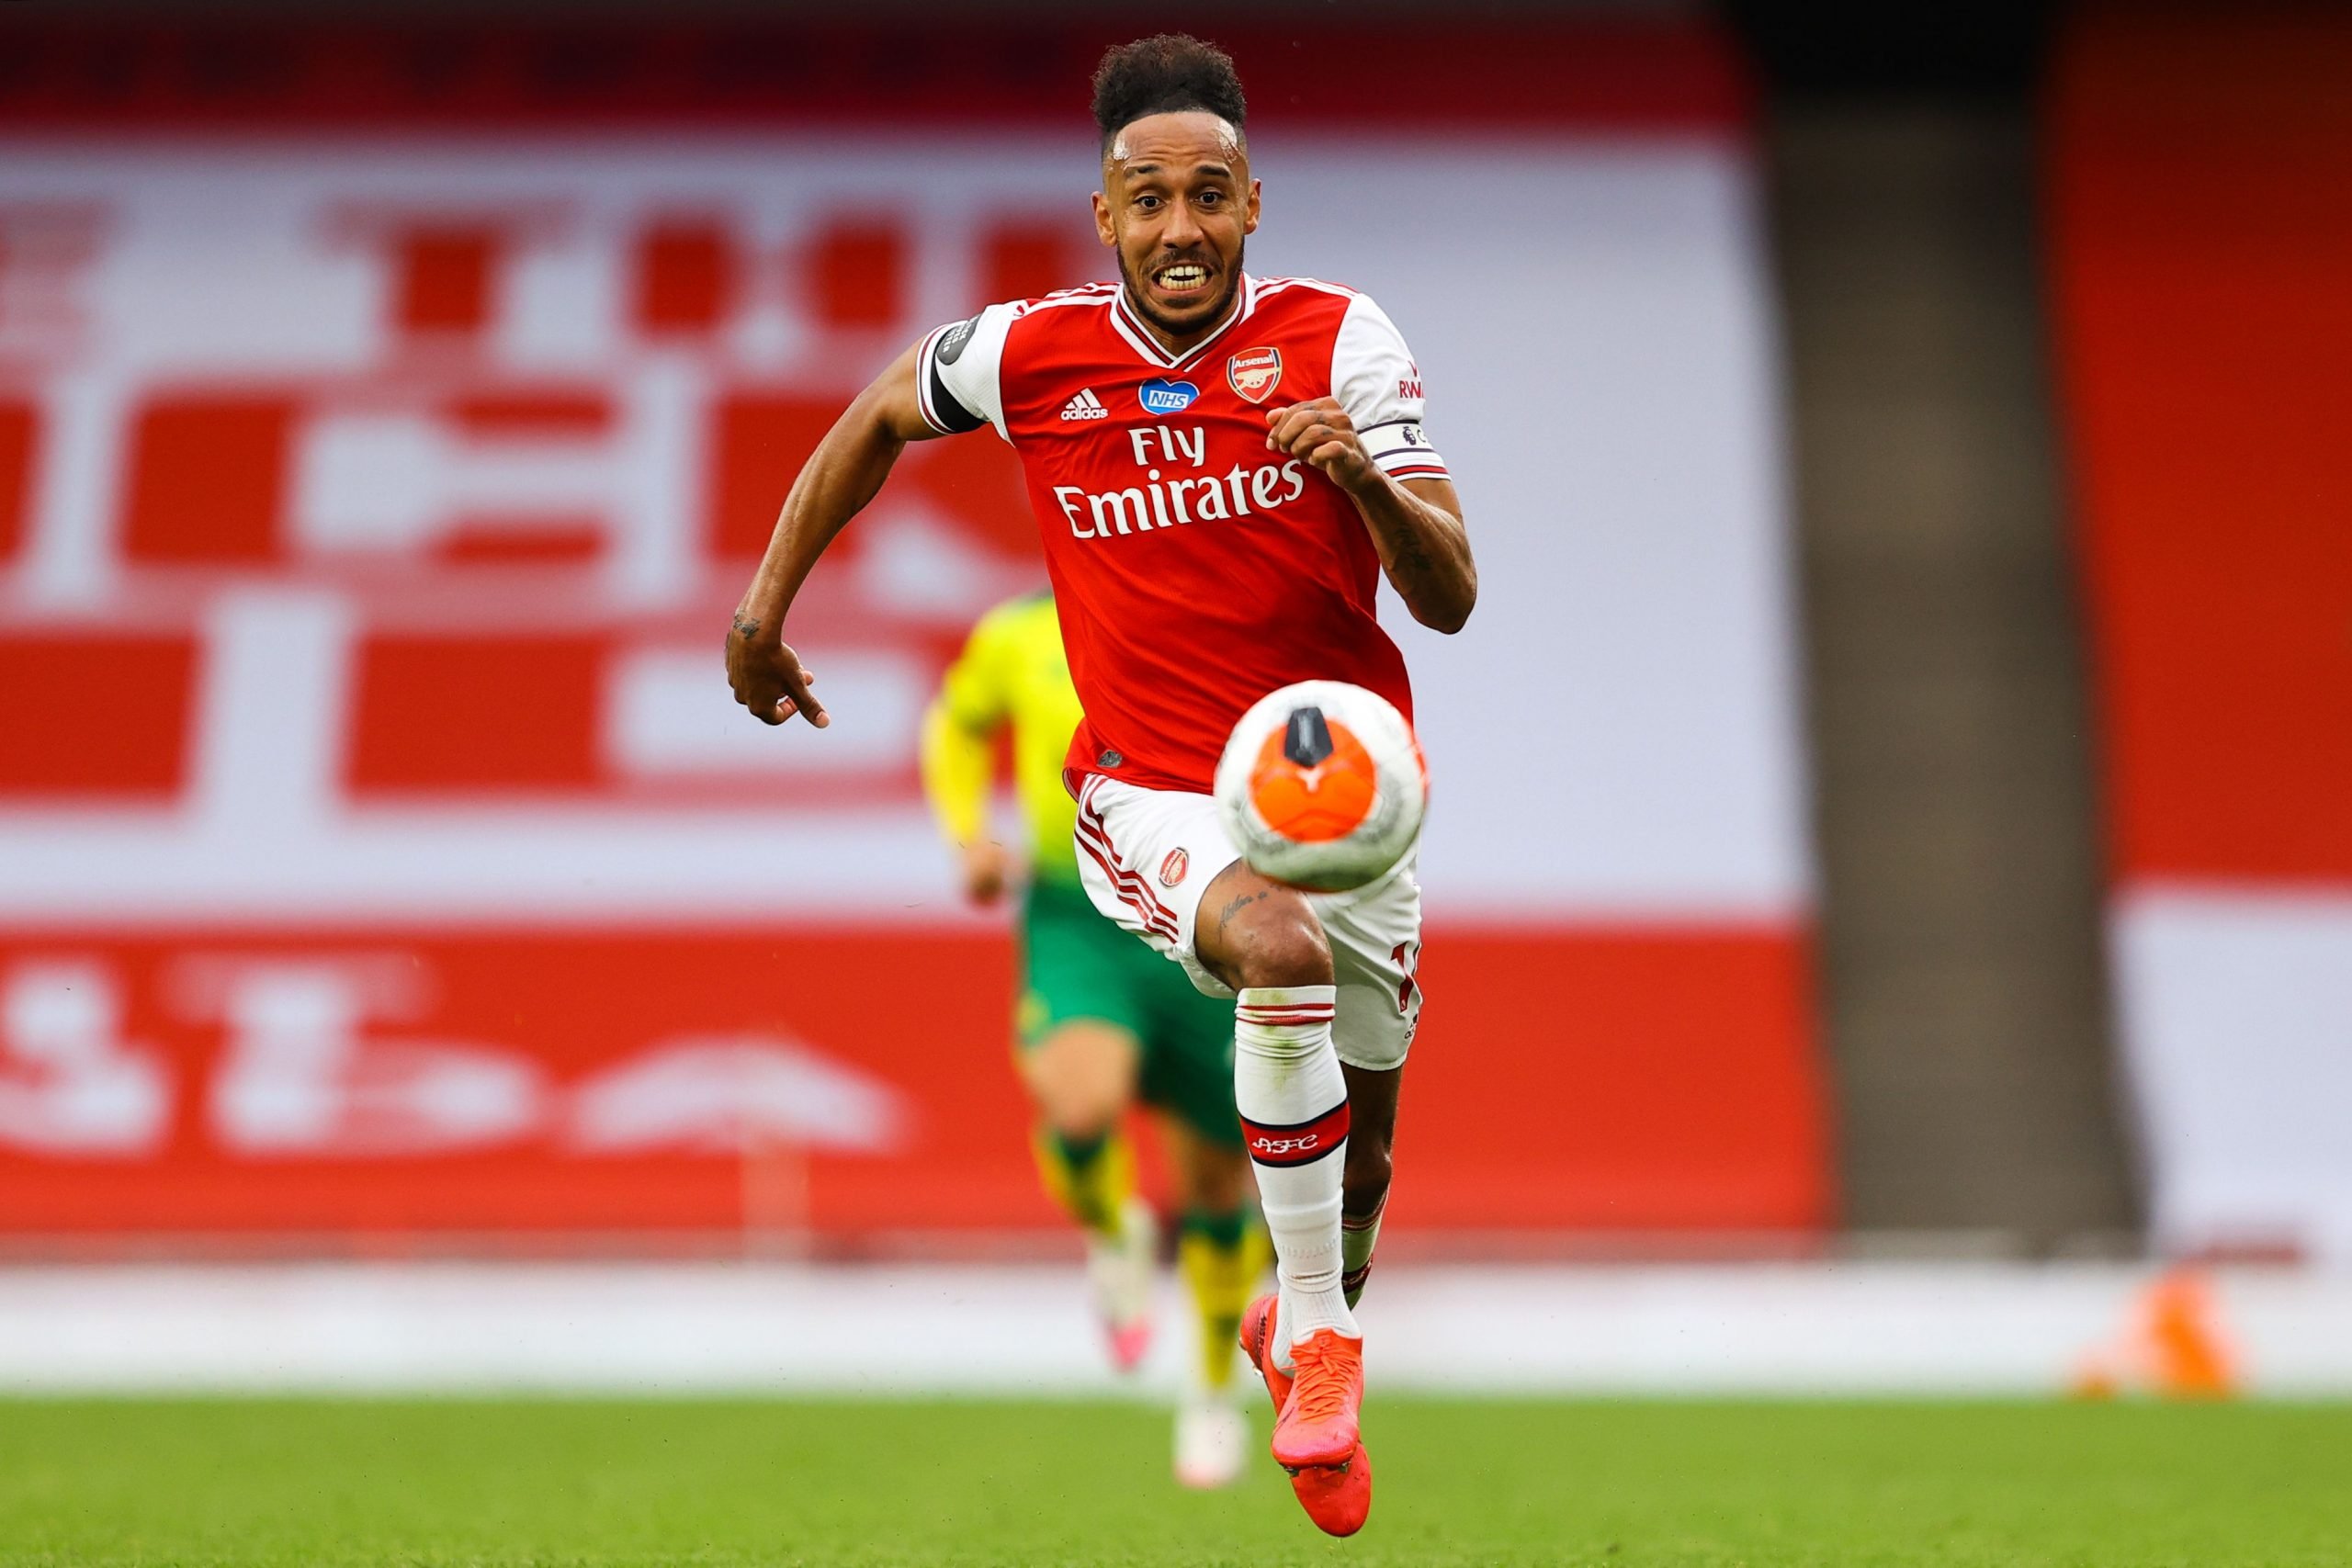 Arsenal Player Ratings Vs Norwich City - Aubameyang chases the ball